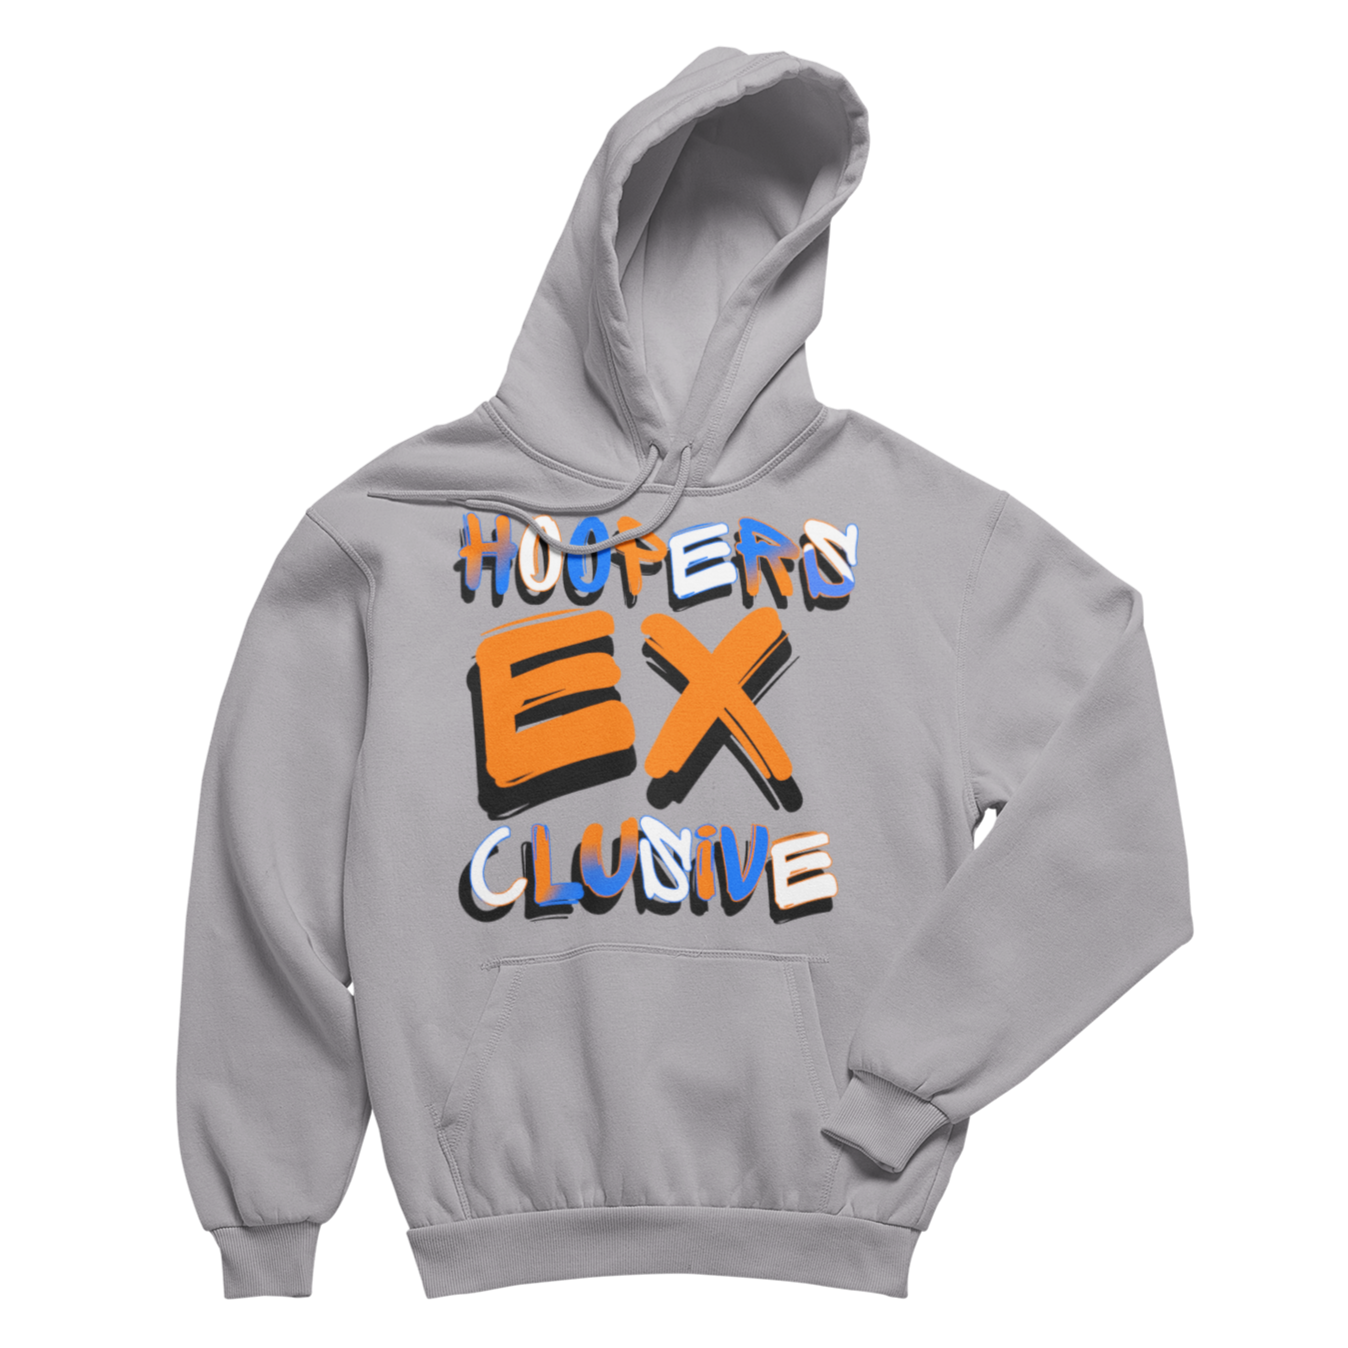 'What the Exclusive?' Hoodie